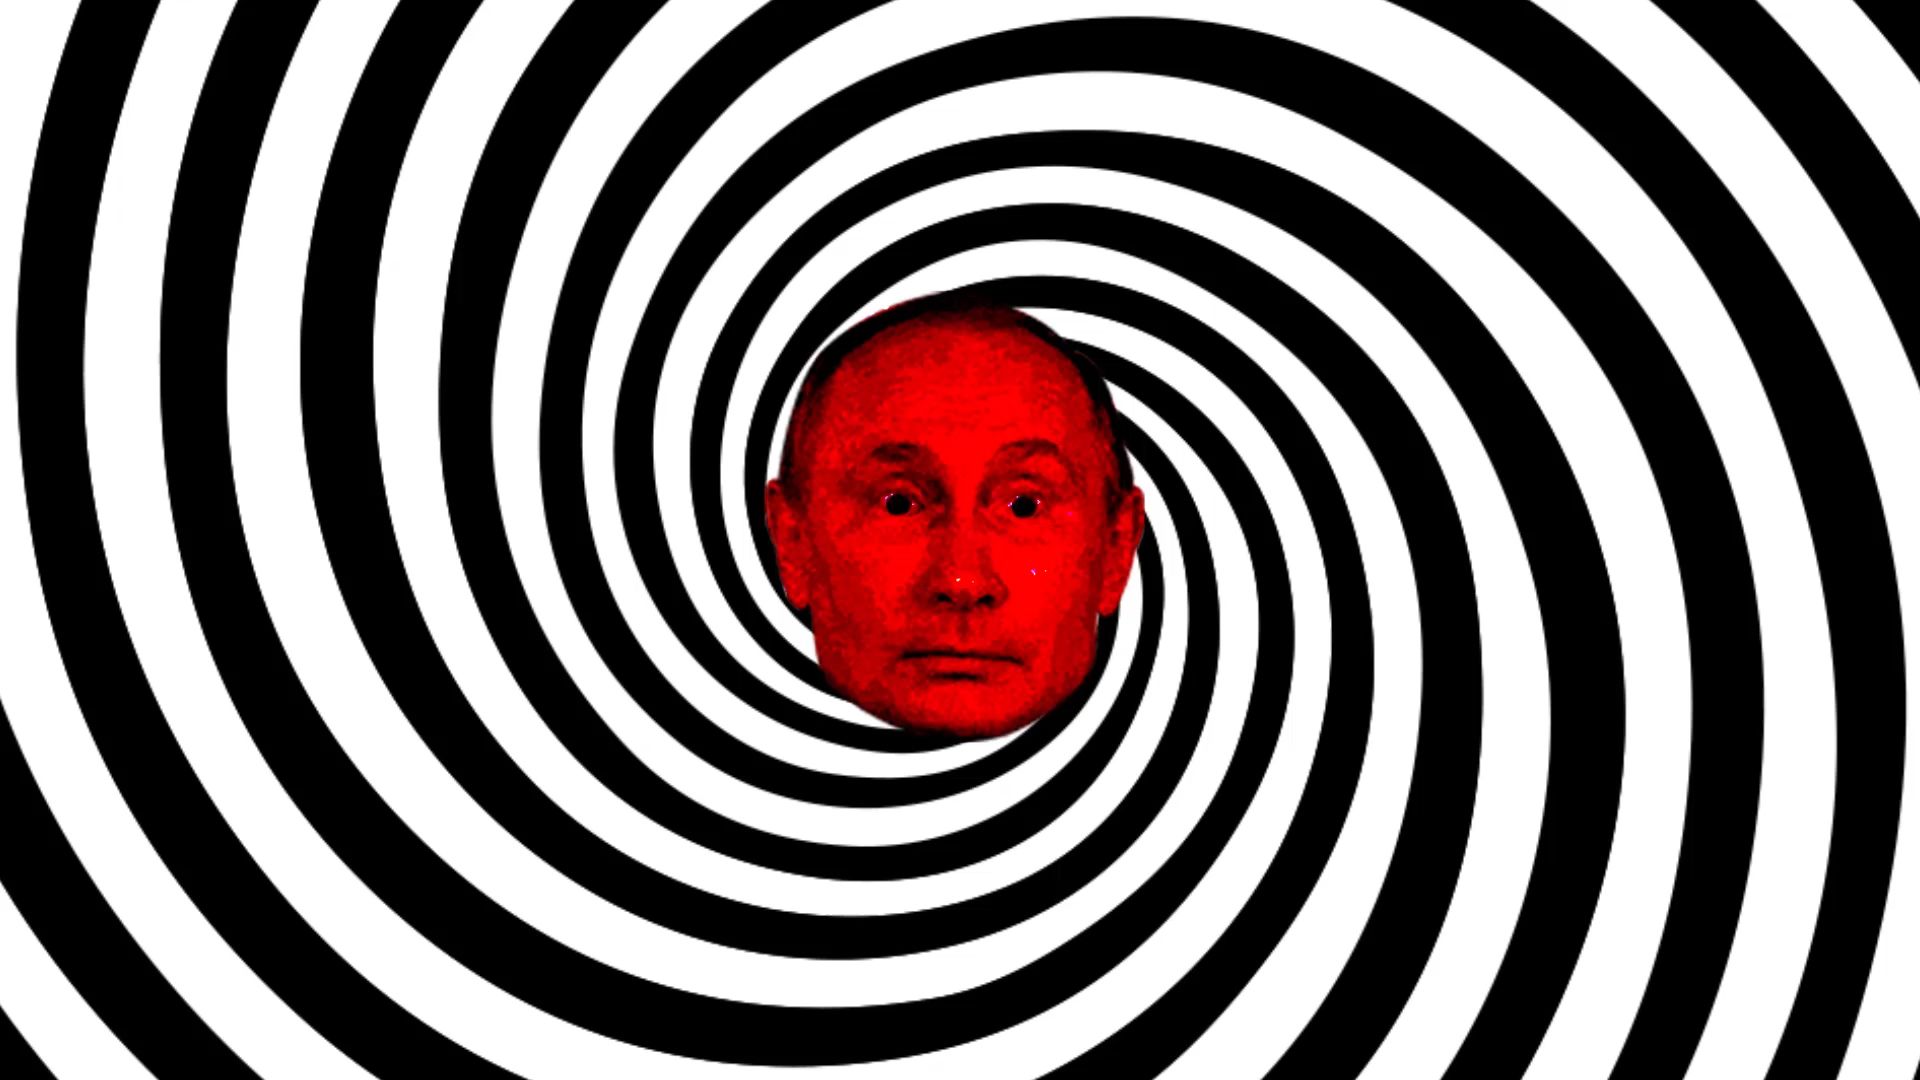 Putin's face in the center of a hypnotic spiral